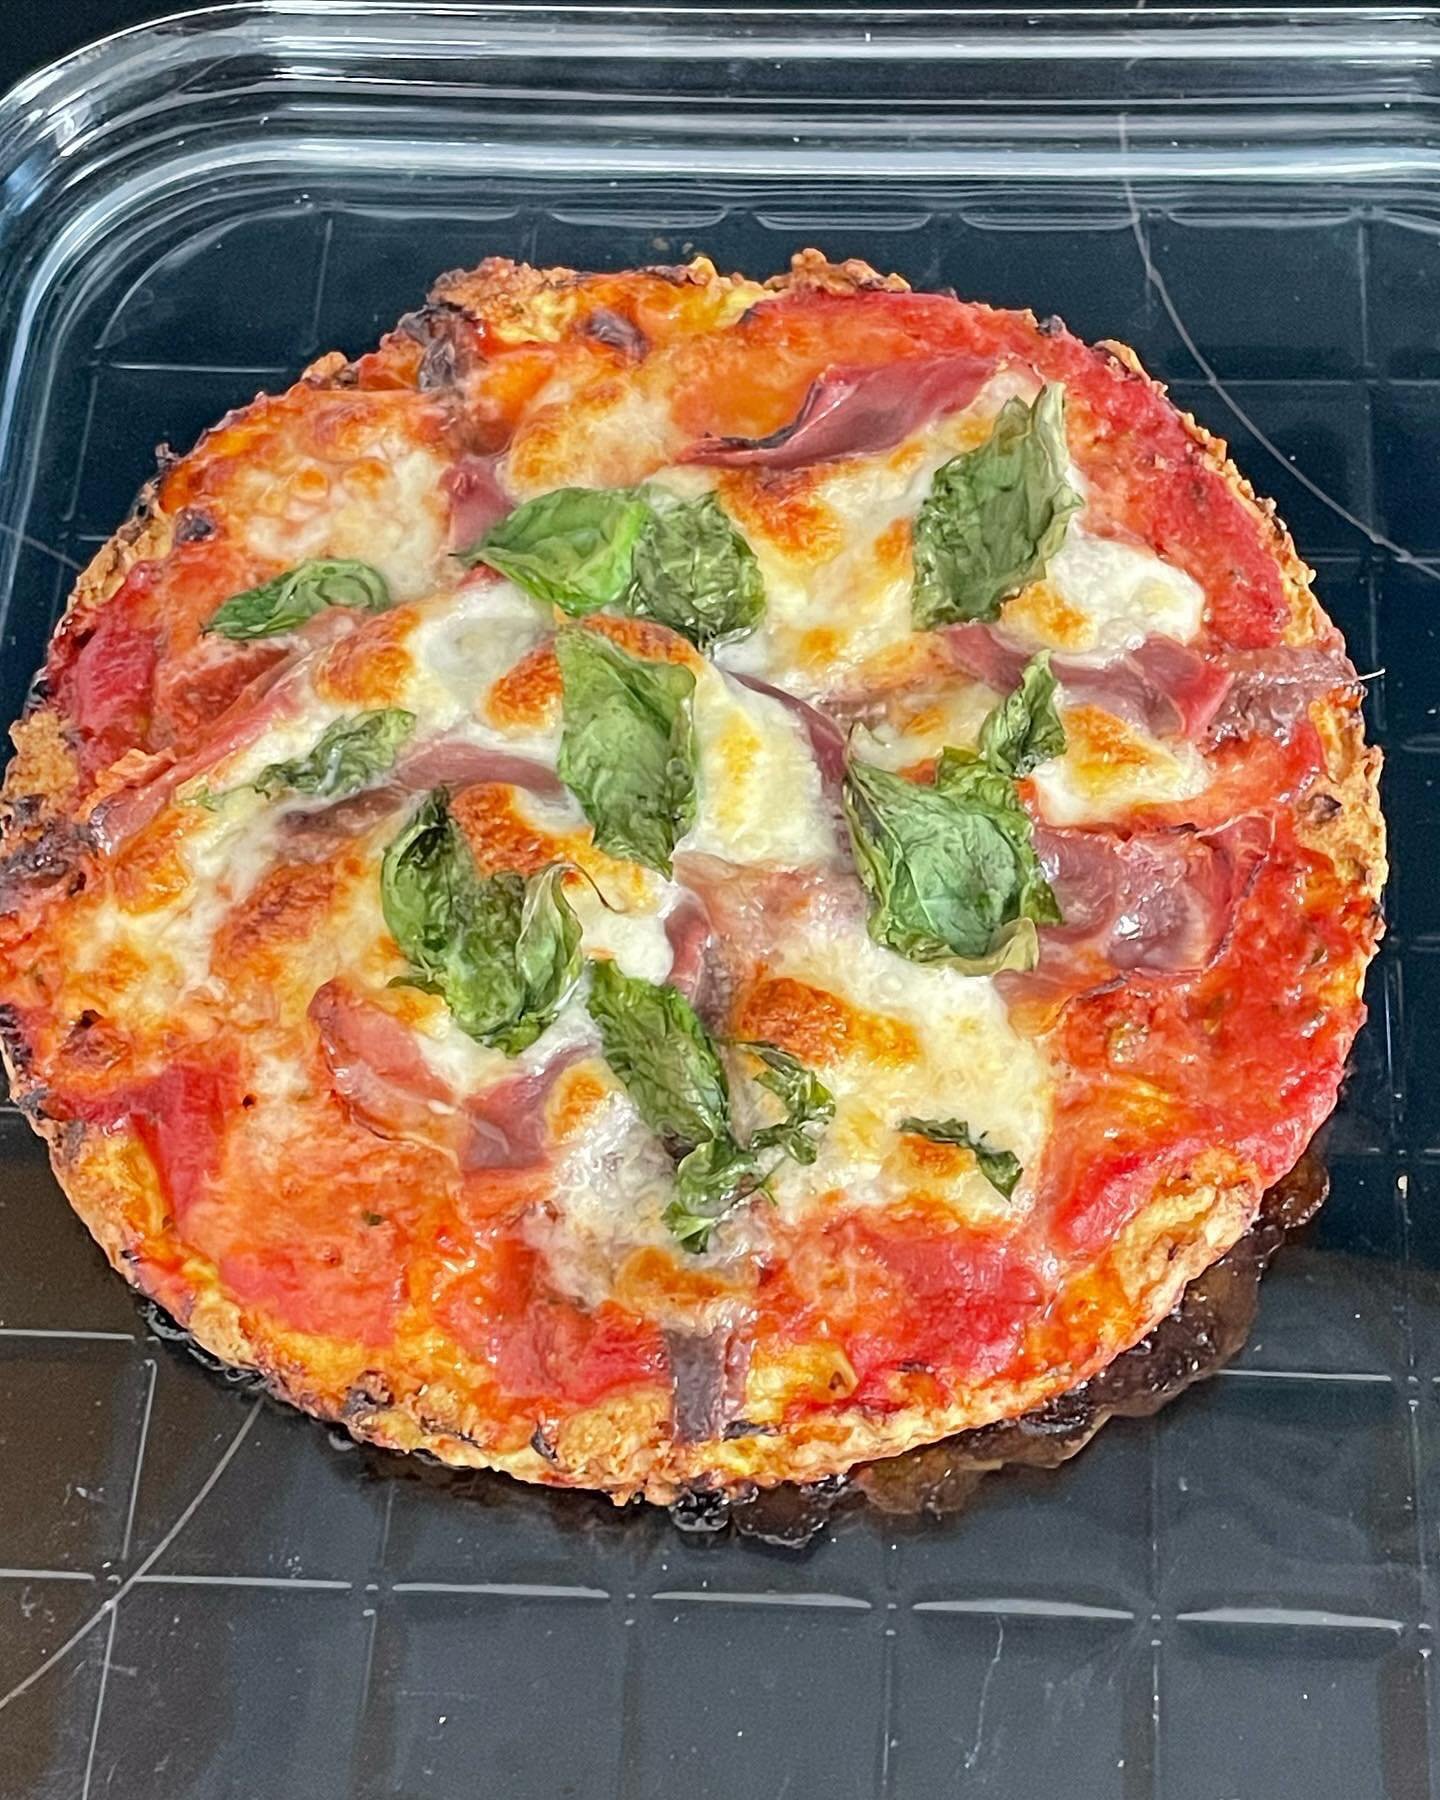 🍕🥚 Low-Carb, Nutritious Pizza 🌿🥦
&nbsp;
I love pizza but I&rsquo;m also mindful about the type, quantity and timing of my carbohydrate intake.
&nbsp;
This recipe is a great option if, like me, you are keeping an eye on your carbs!
&nbsp;
The base